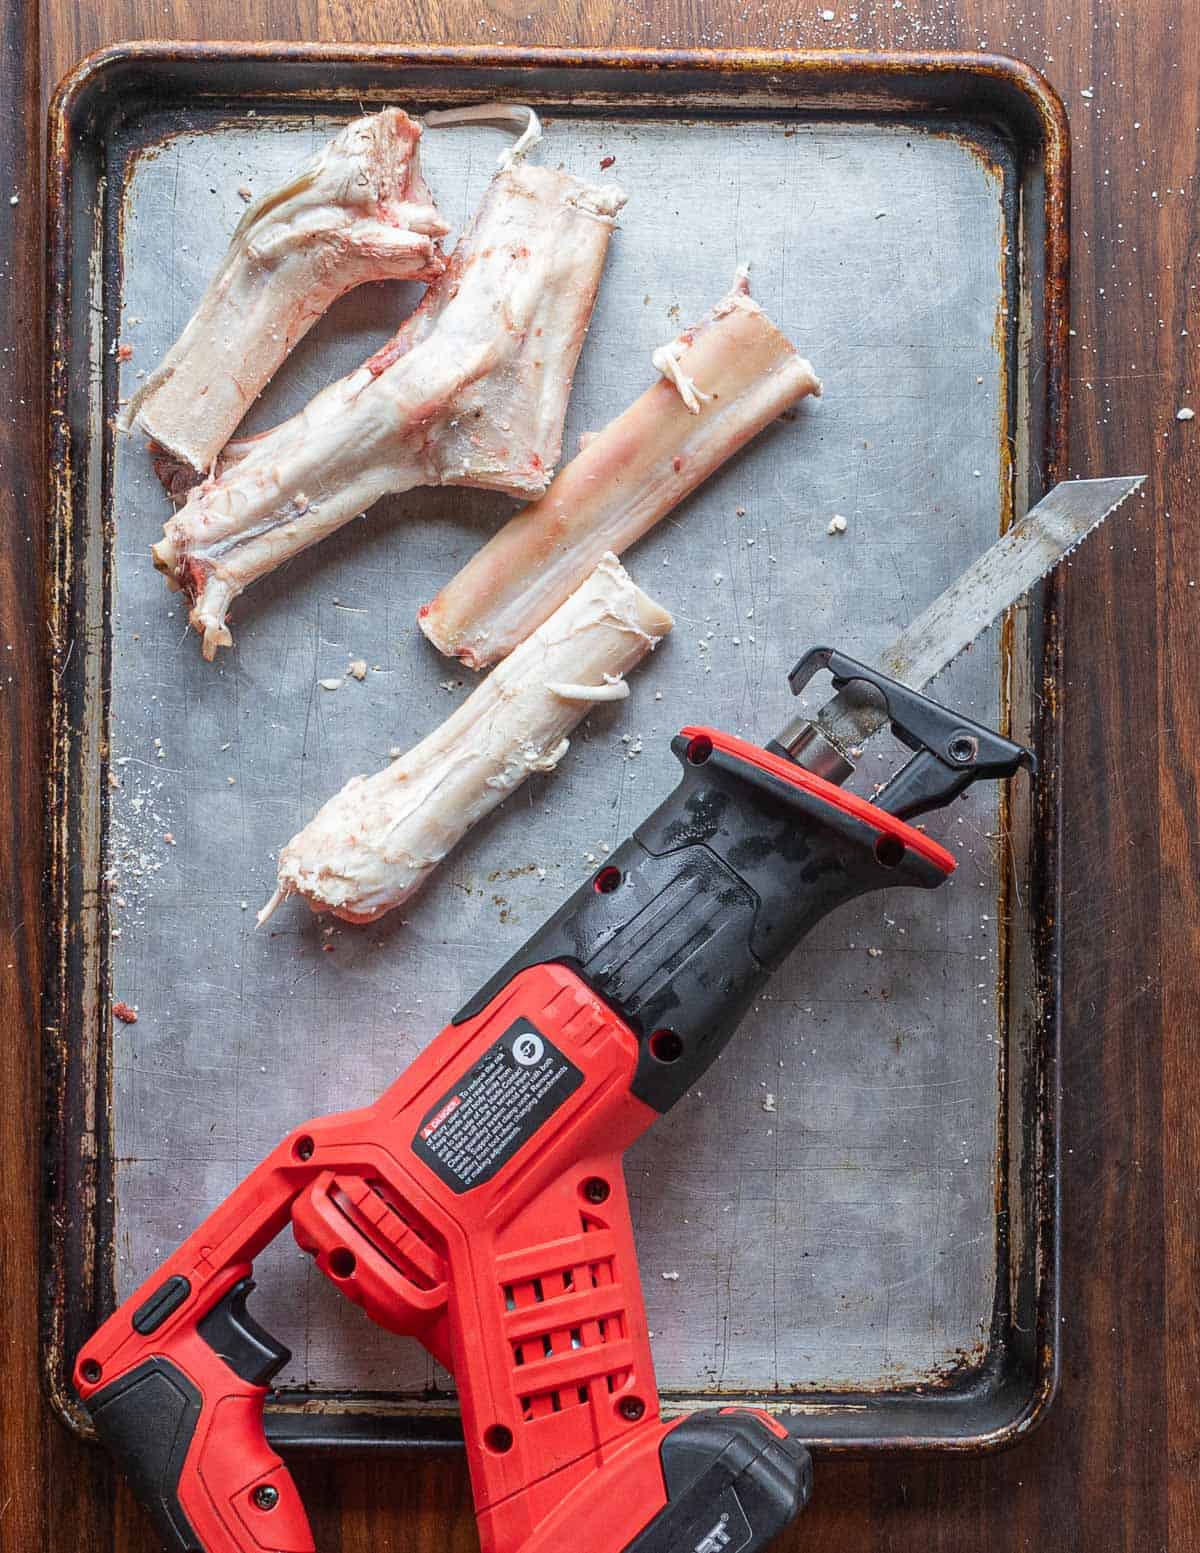 Cutting venison leg bones into pieces with a sawzall or reciprocating saw. 